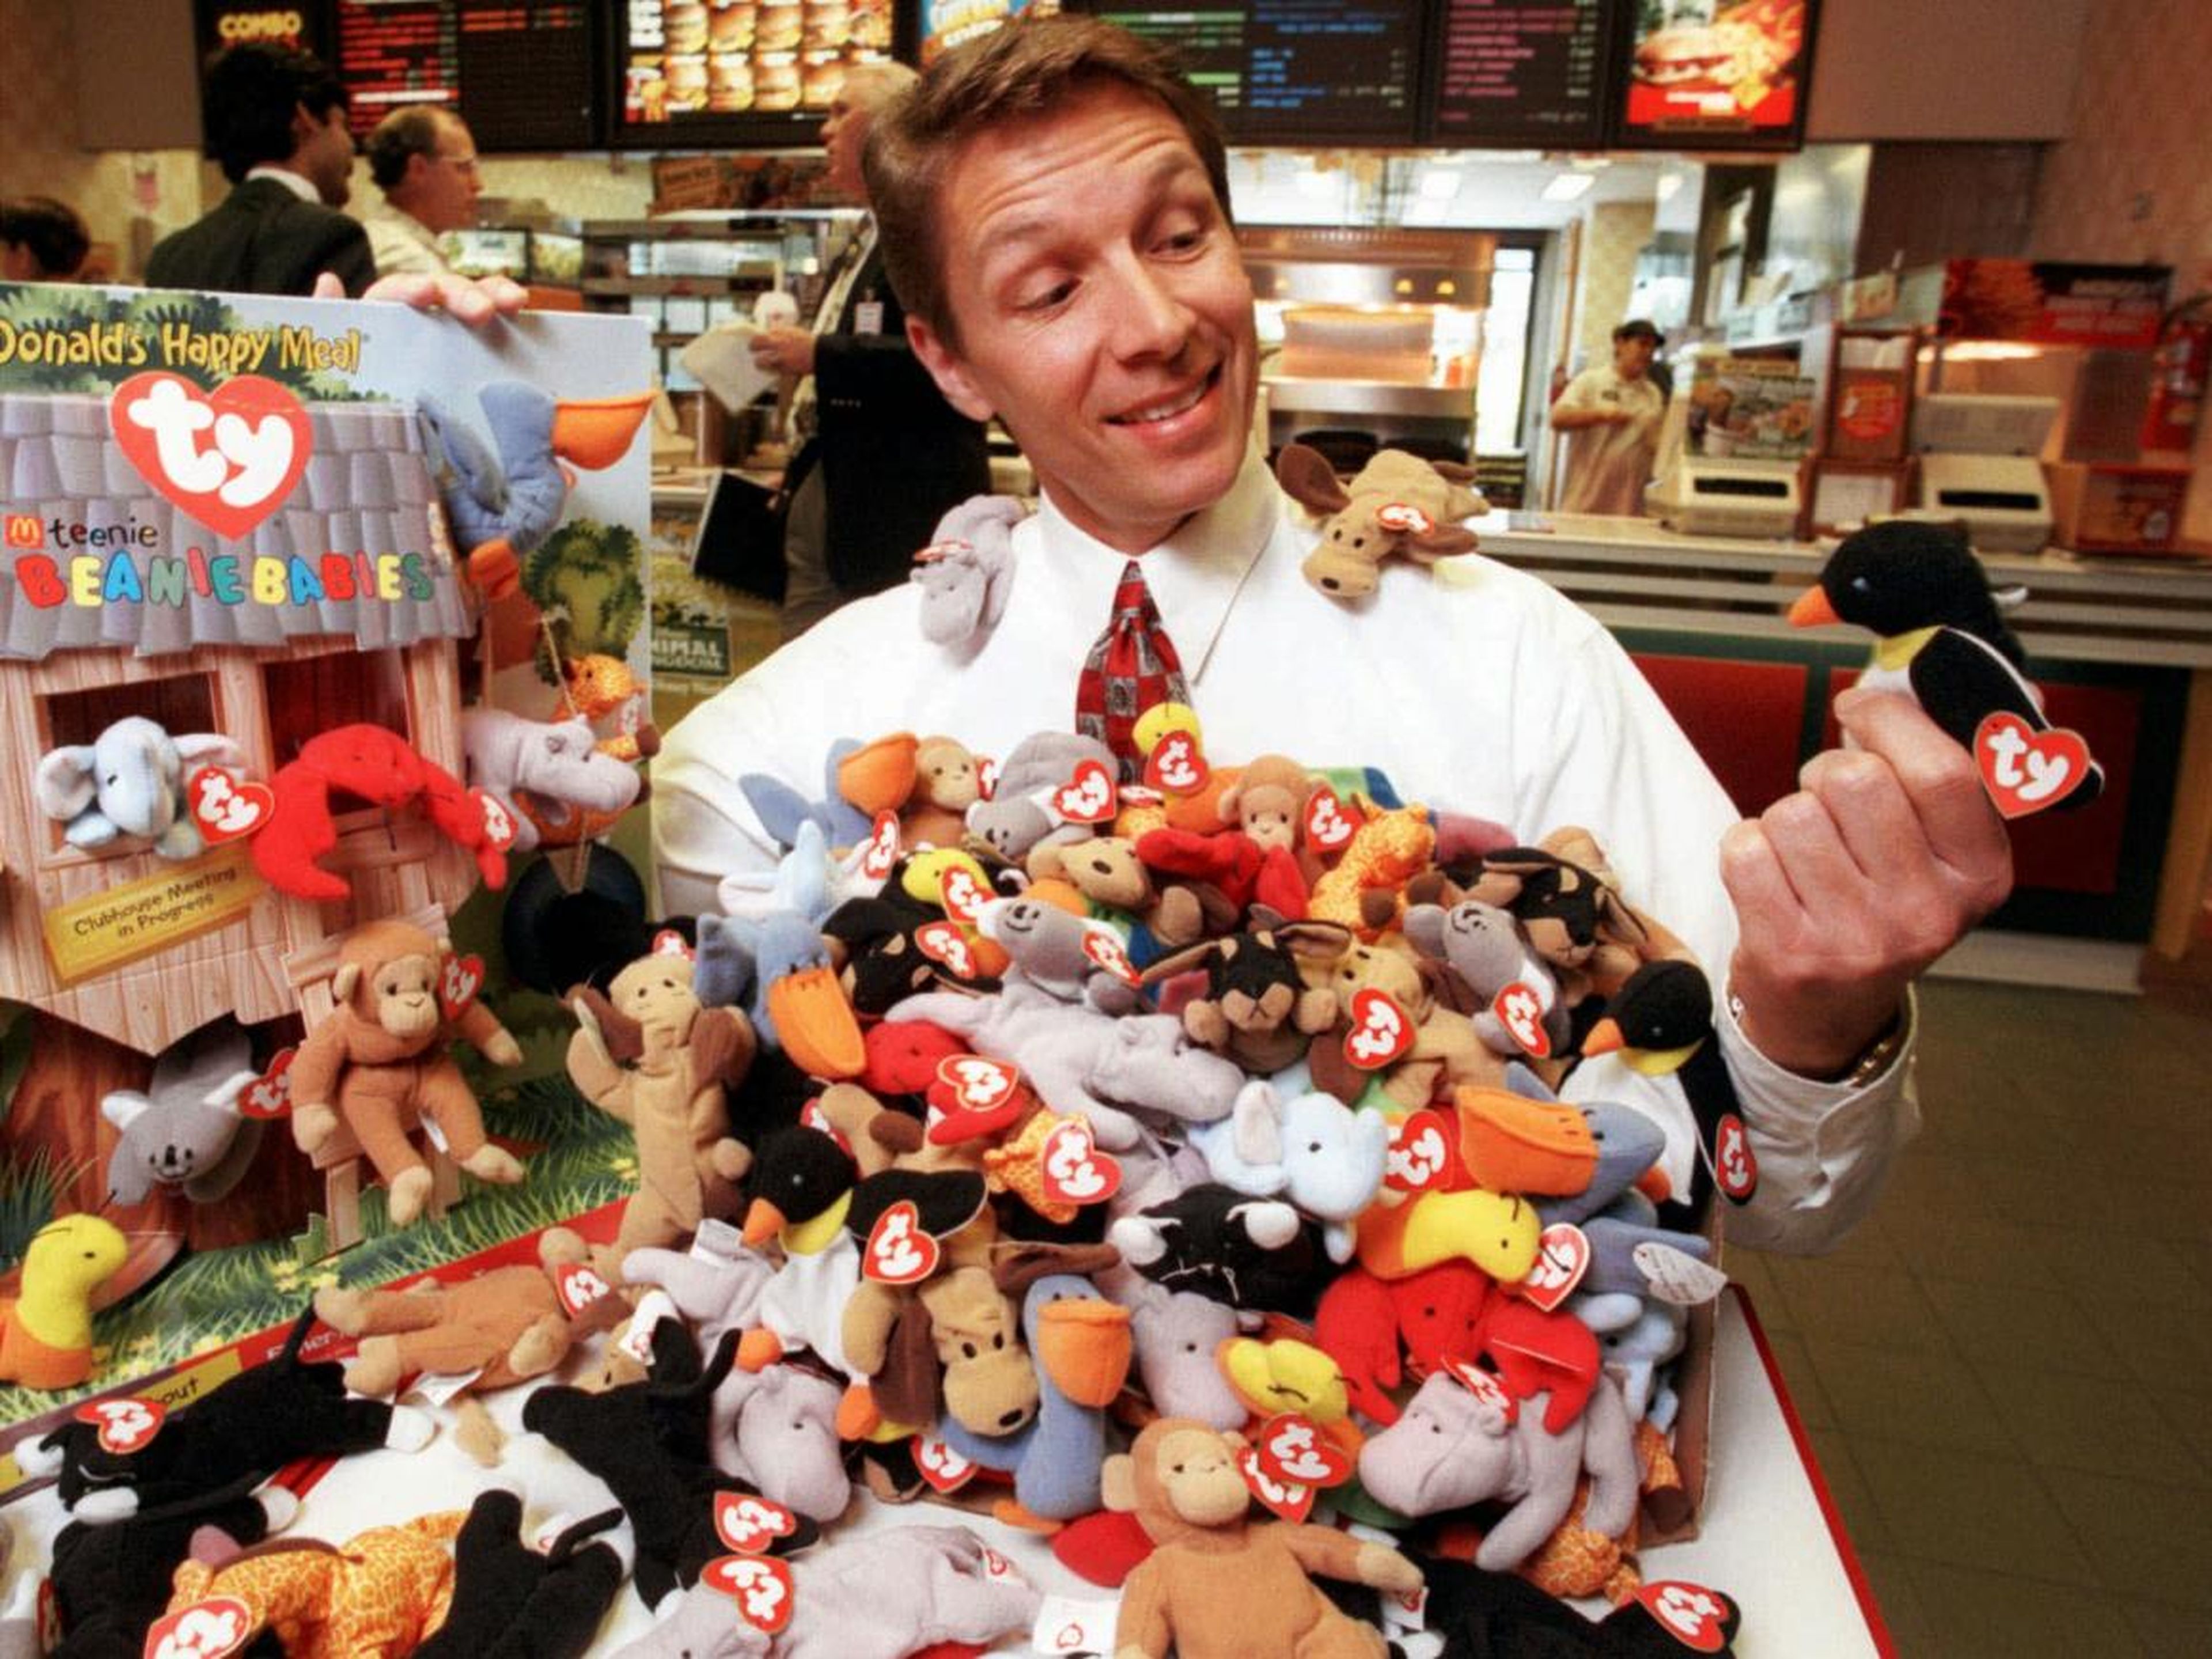 Miniature Beanie Babies were once included in McDonald's Happy Meals.